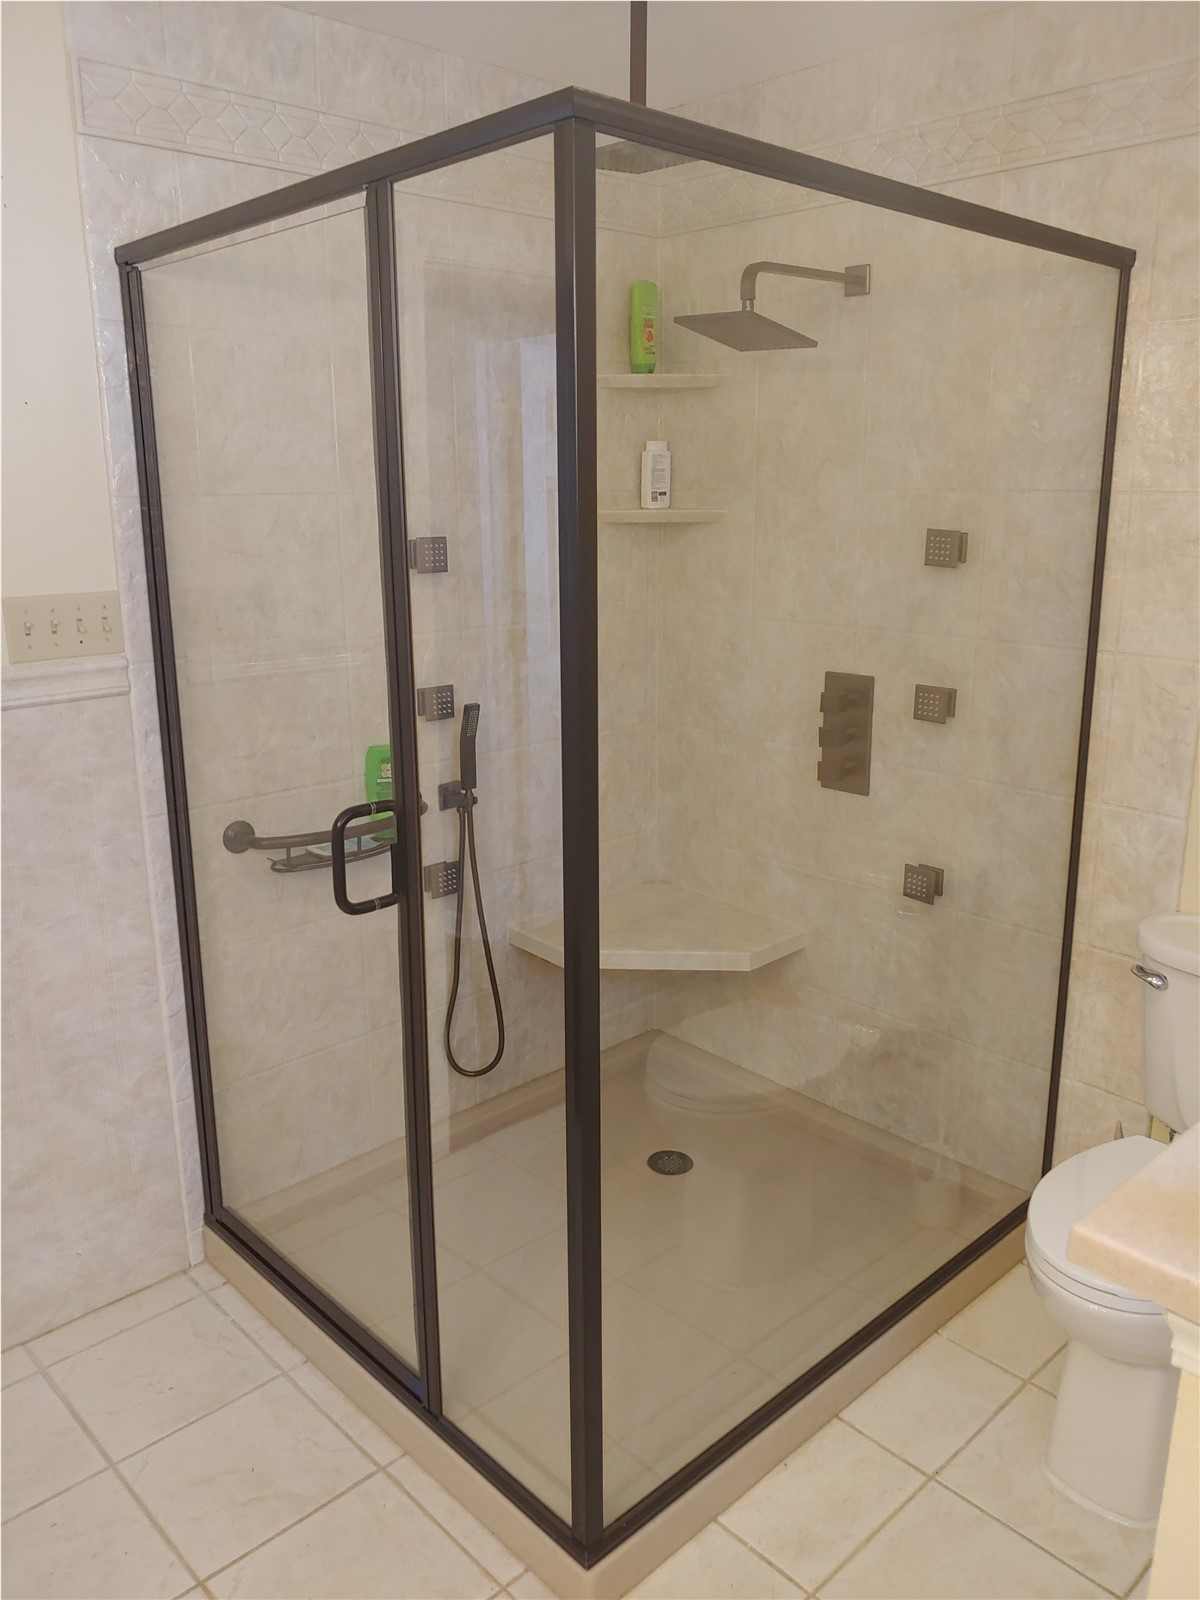 3 Reasons to Update Your Old Tub to a Brand-New Shower!